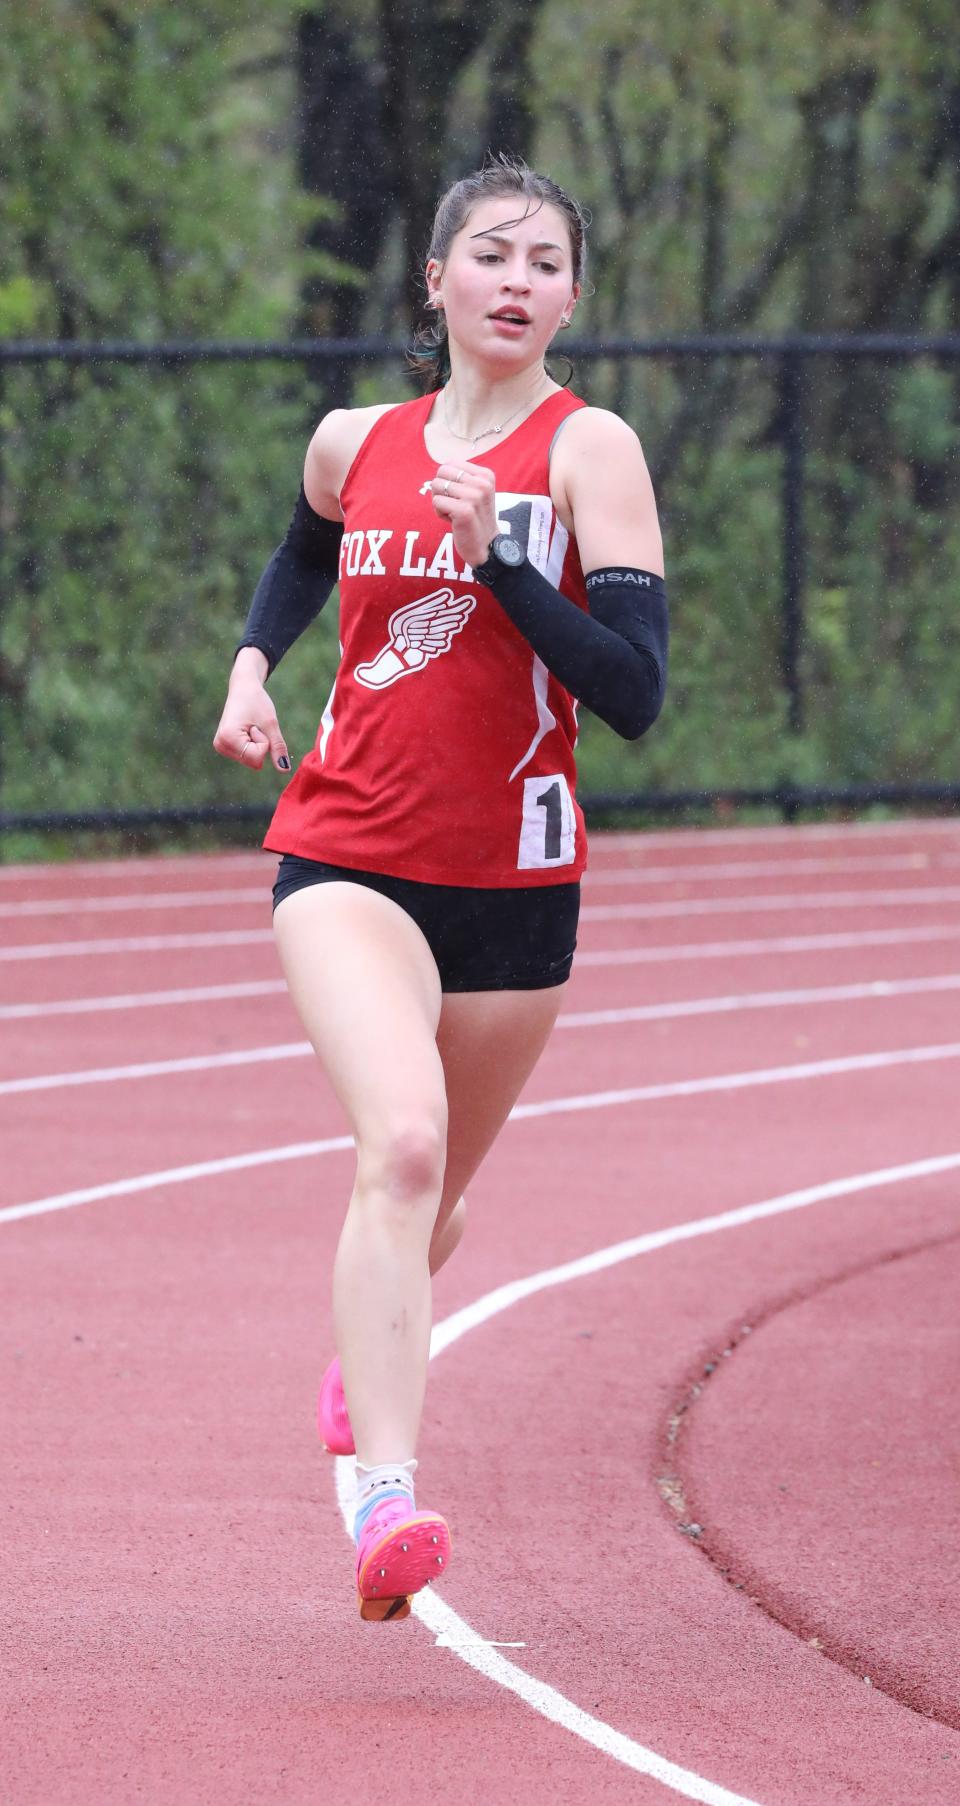 Morgan Eigel from Fox Lane placed first as athletes compete in the girls 1600 meter run during the Gold Rush Invitational Track & Field meet at Clarkstown South High School in West Nyack, April 29, 2023. 